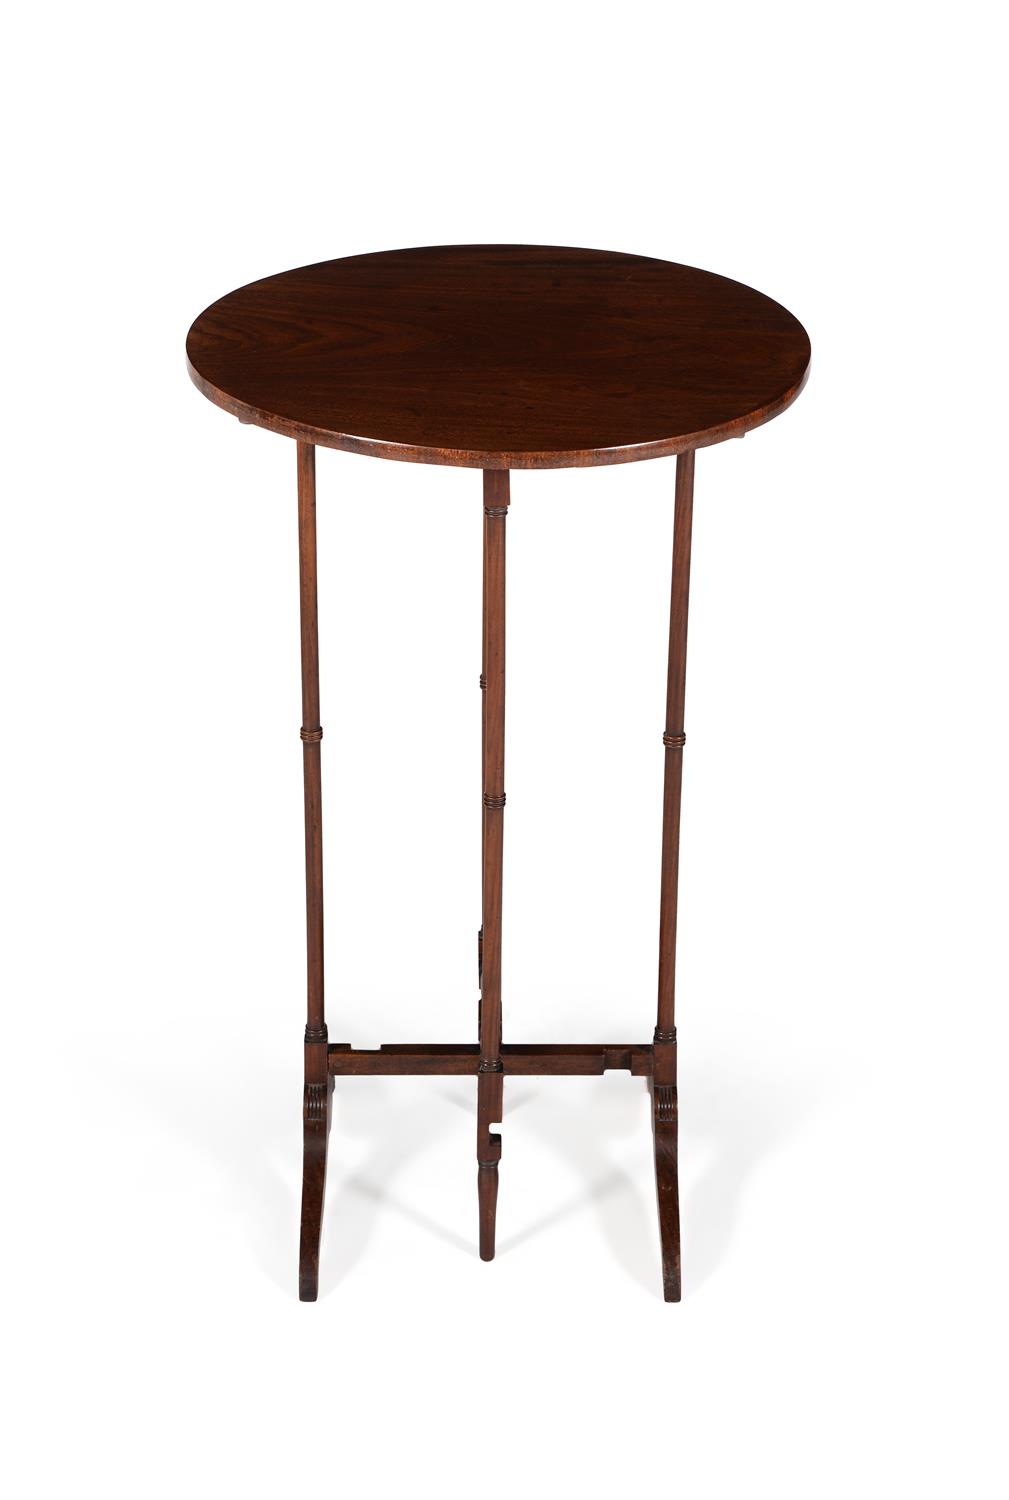 A Regency folding circular topped spider leg table - Image 2 of 5